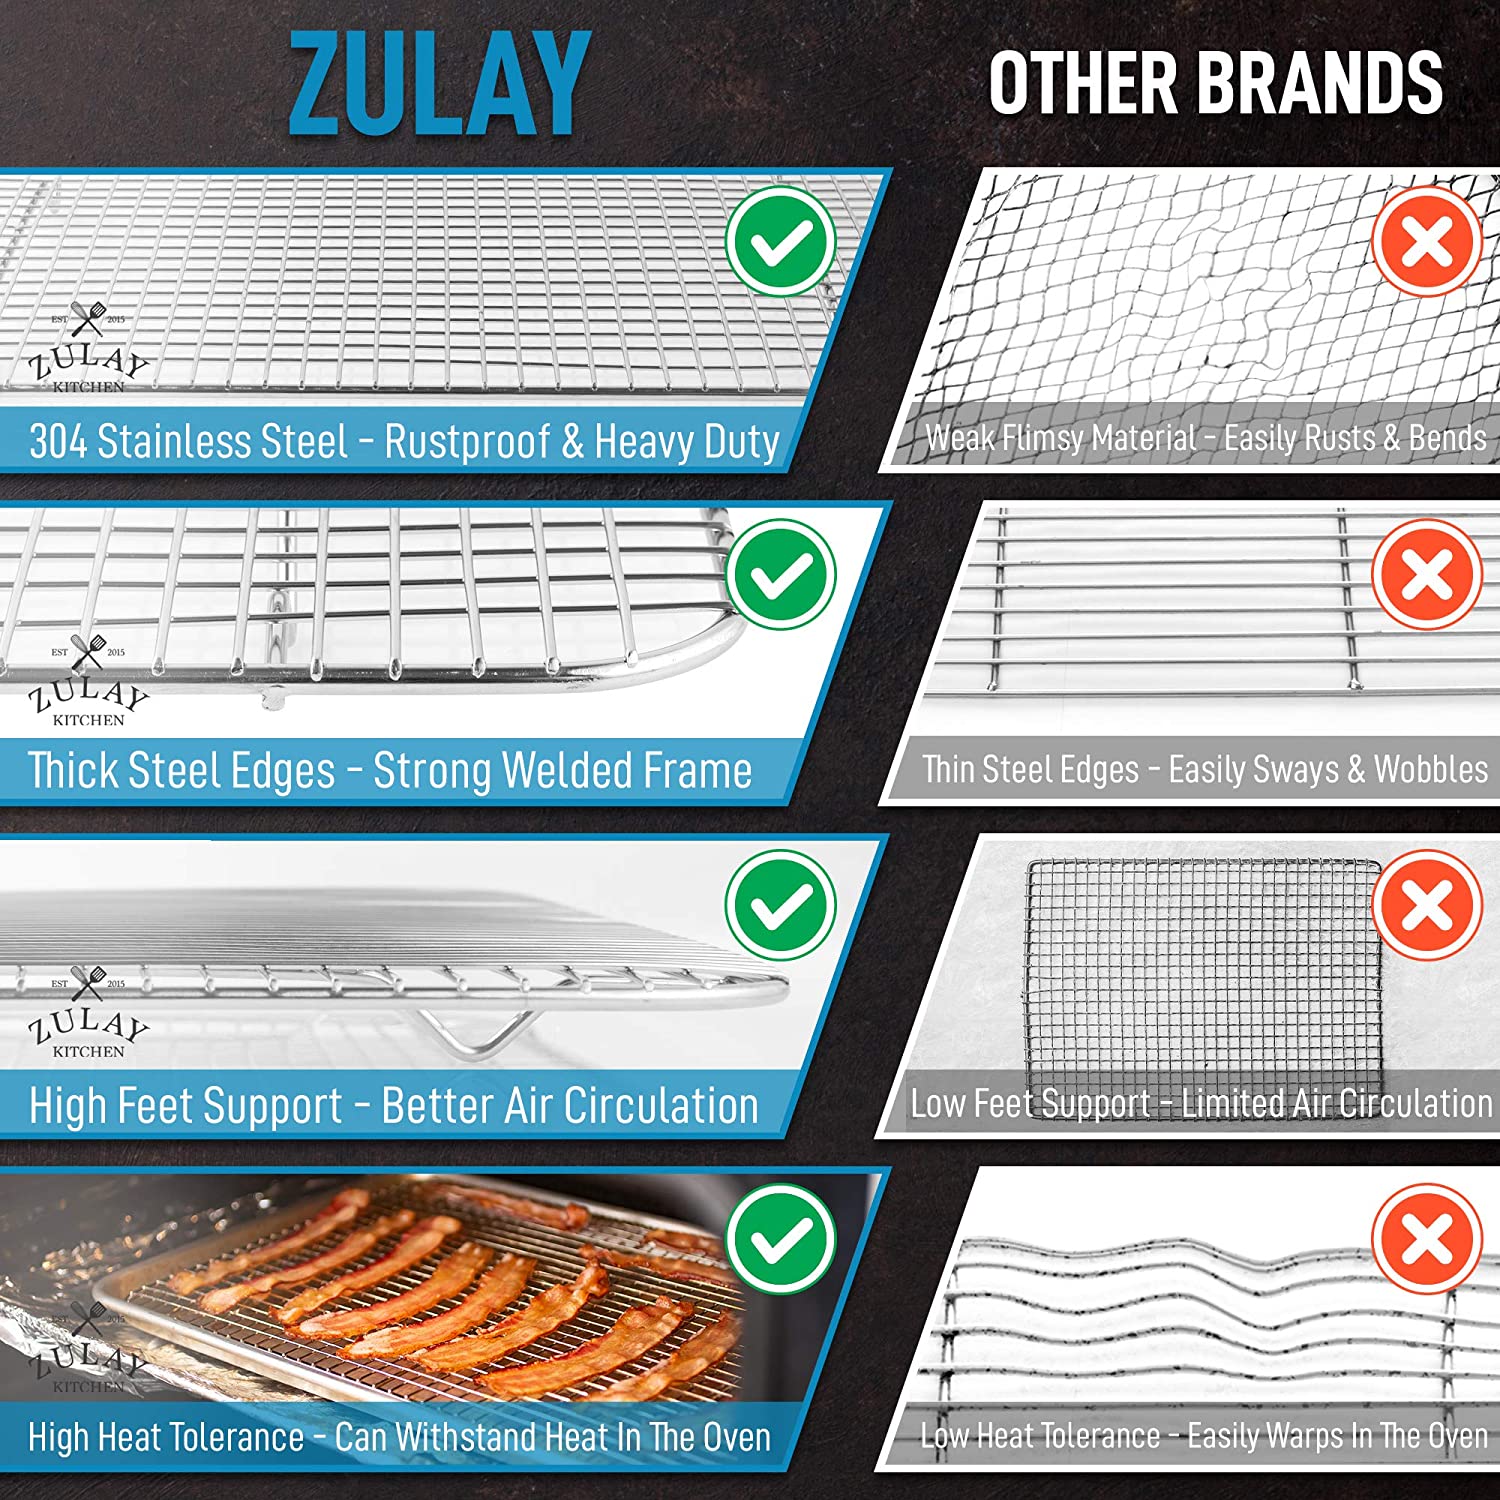 Spring Chef Oven Safe, Heavy Duty Stainless Steel Baking Rack & Cooling Rack, 10 x 15 Inches Fits Jelly Roll Pan